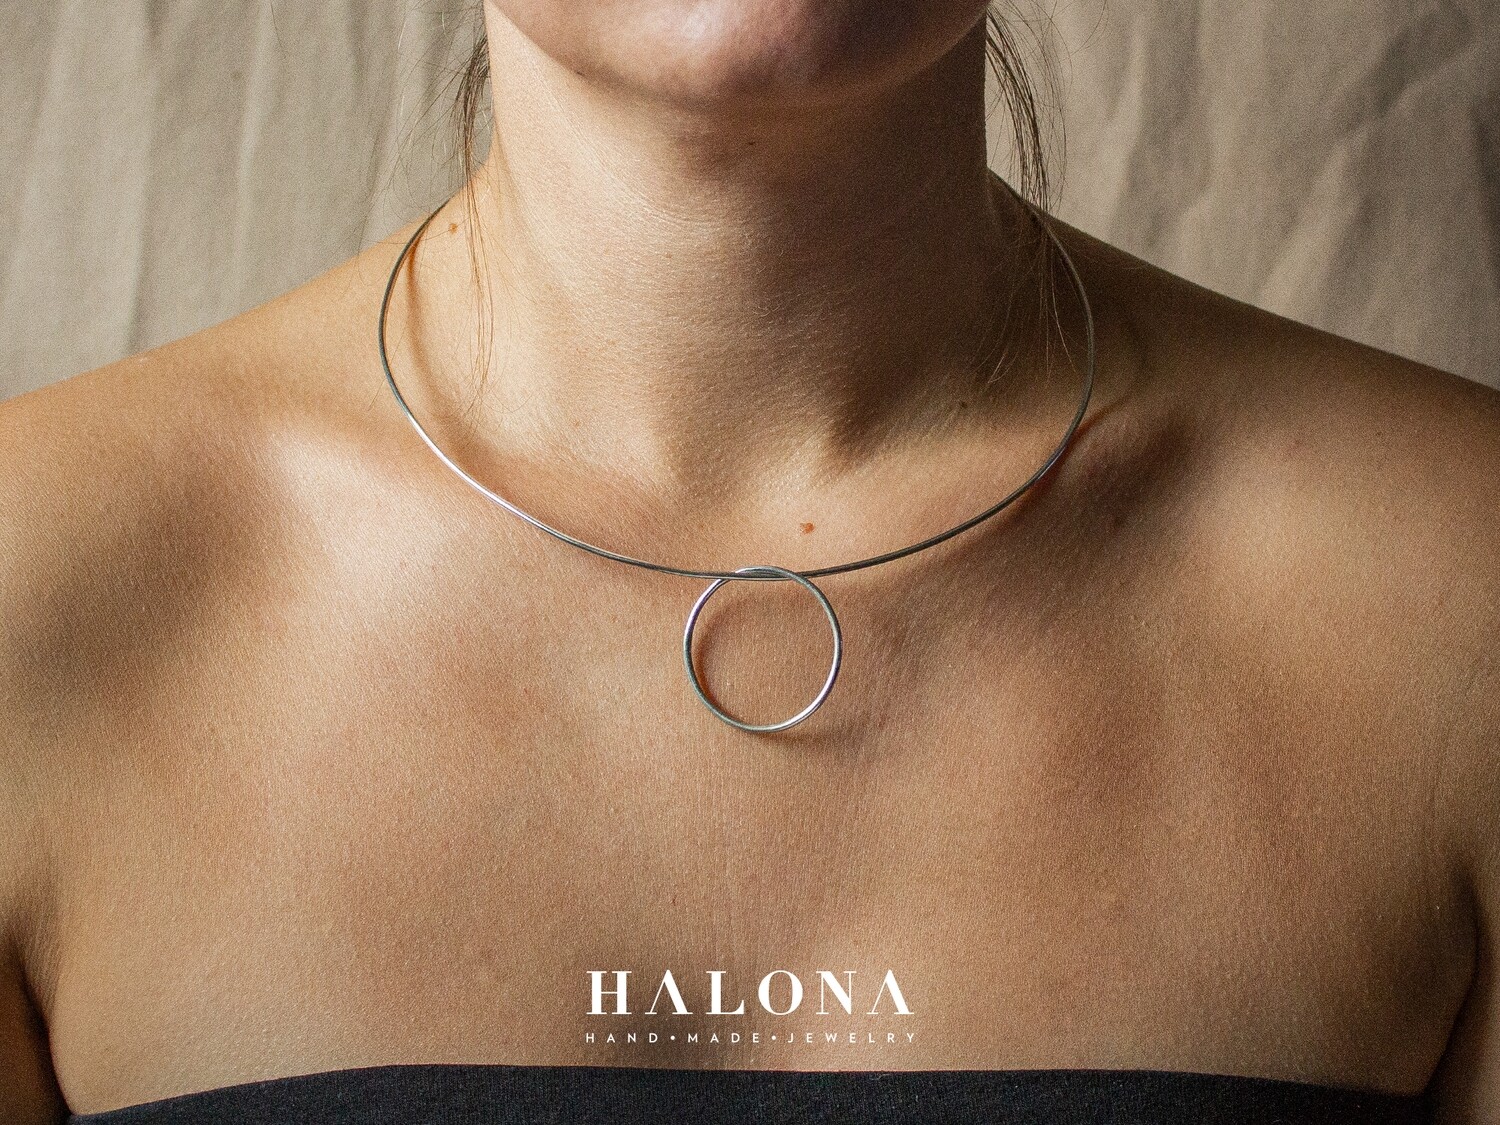 Handmade Silver ring necklace